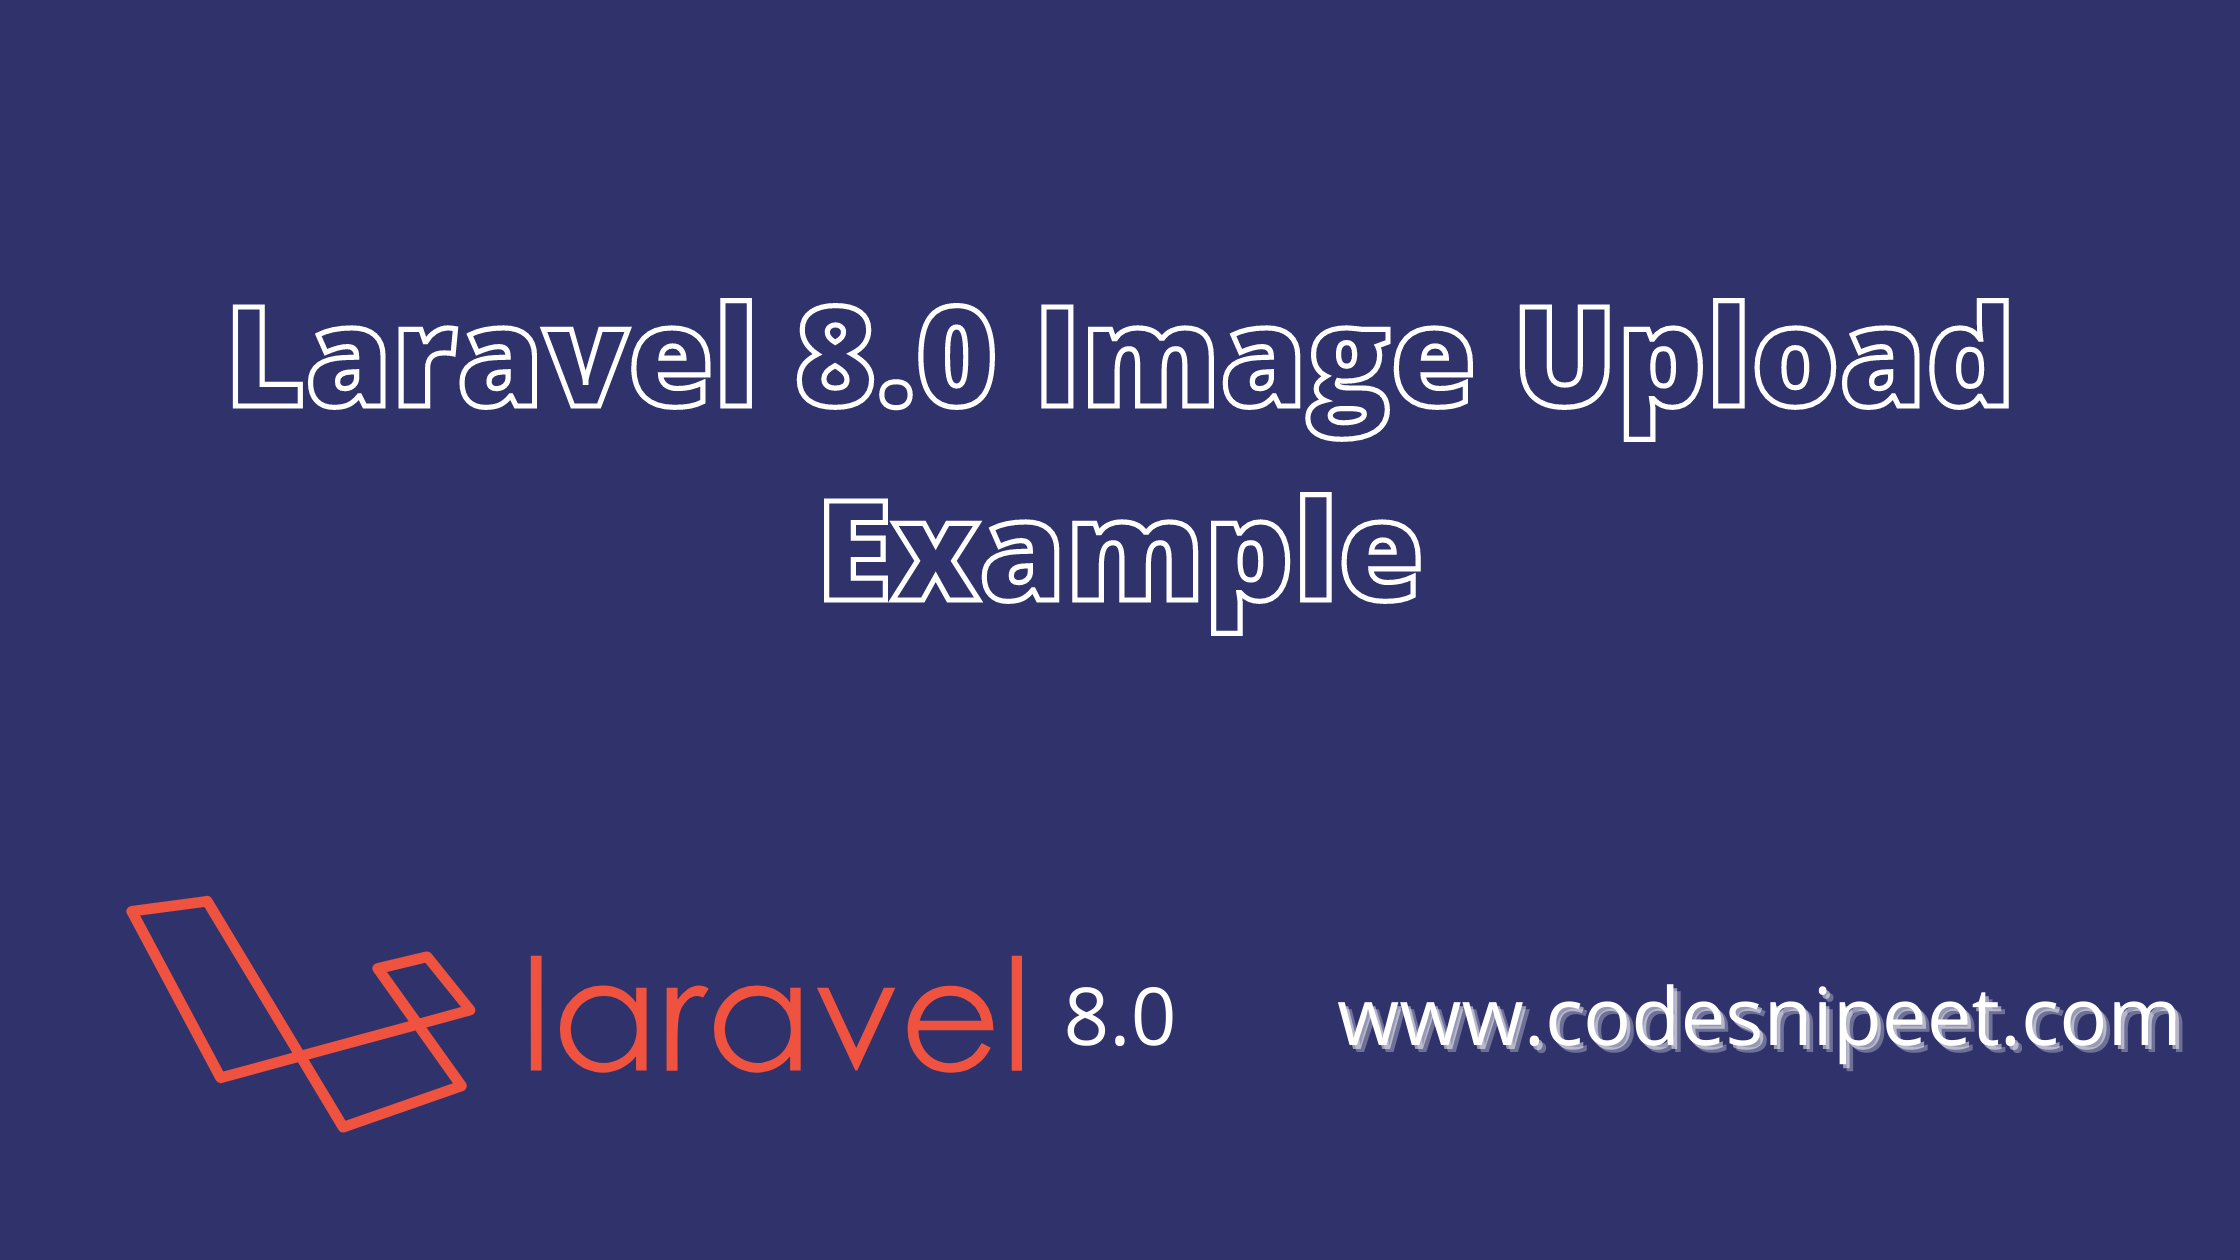 You are currently viewing Laravel 8.0 Image Upload Example